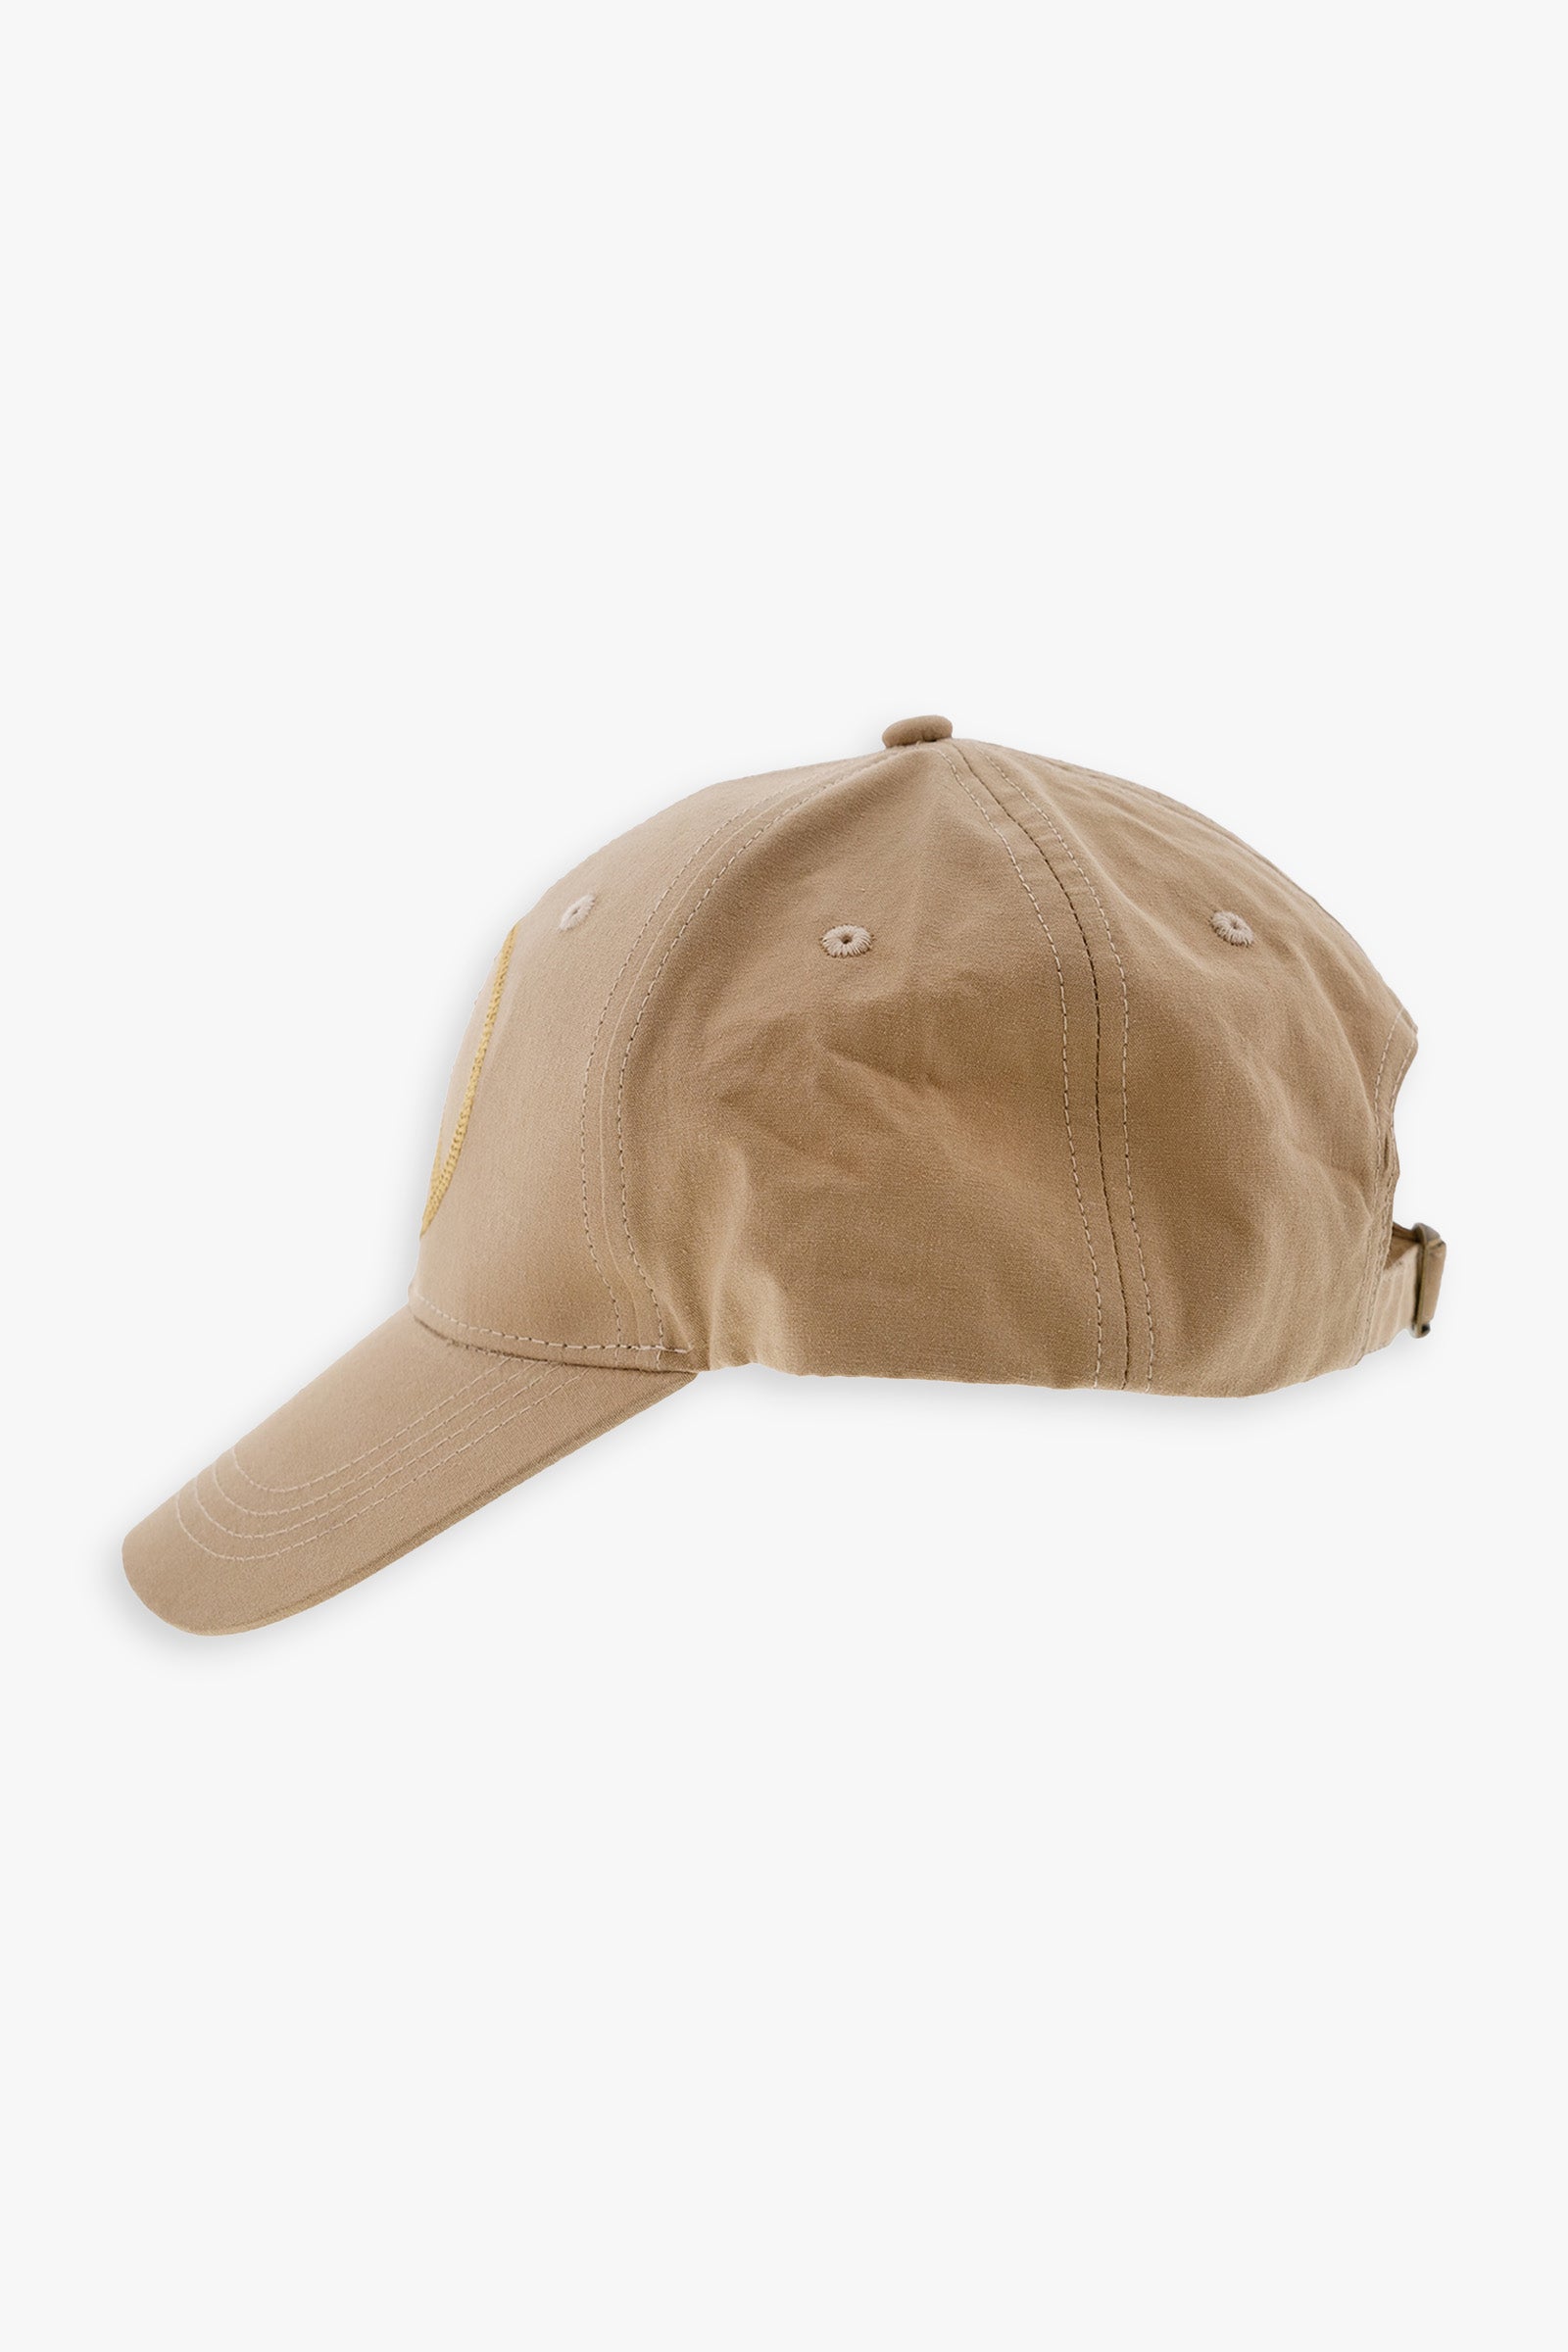 Adult Baseball Cap With Embroidery